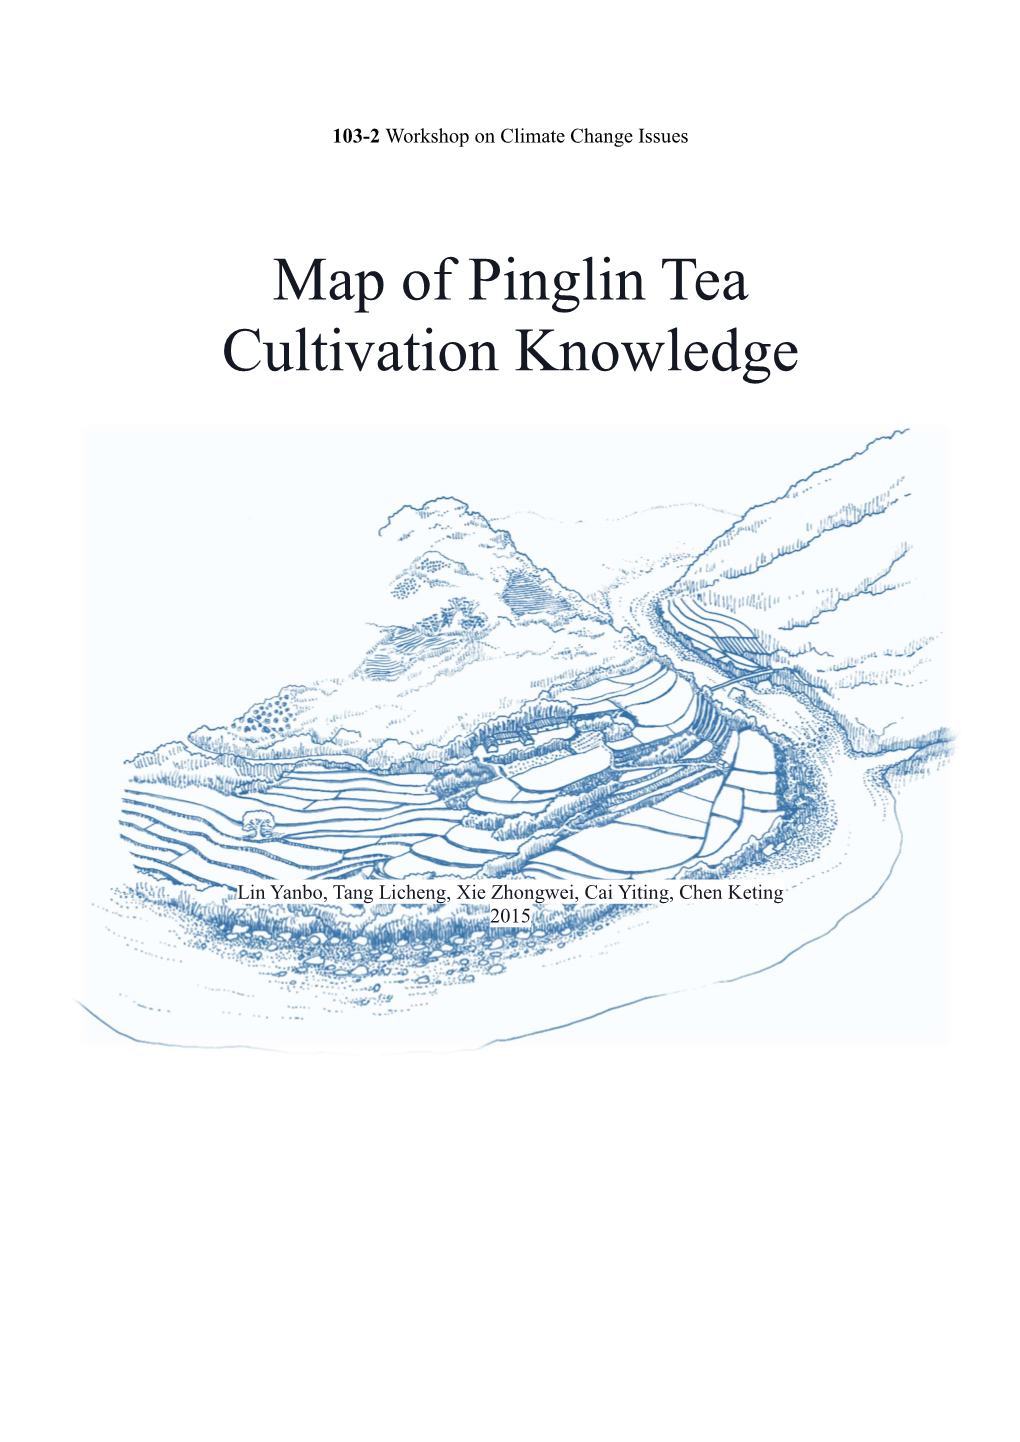 Map of Pinglin Tea Cultivation Knowledge